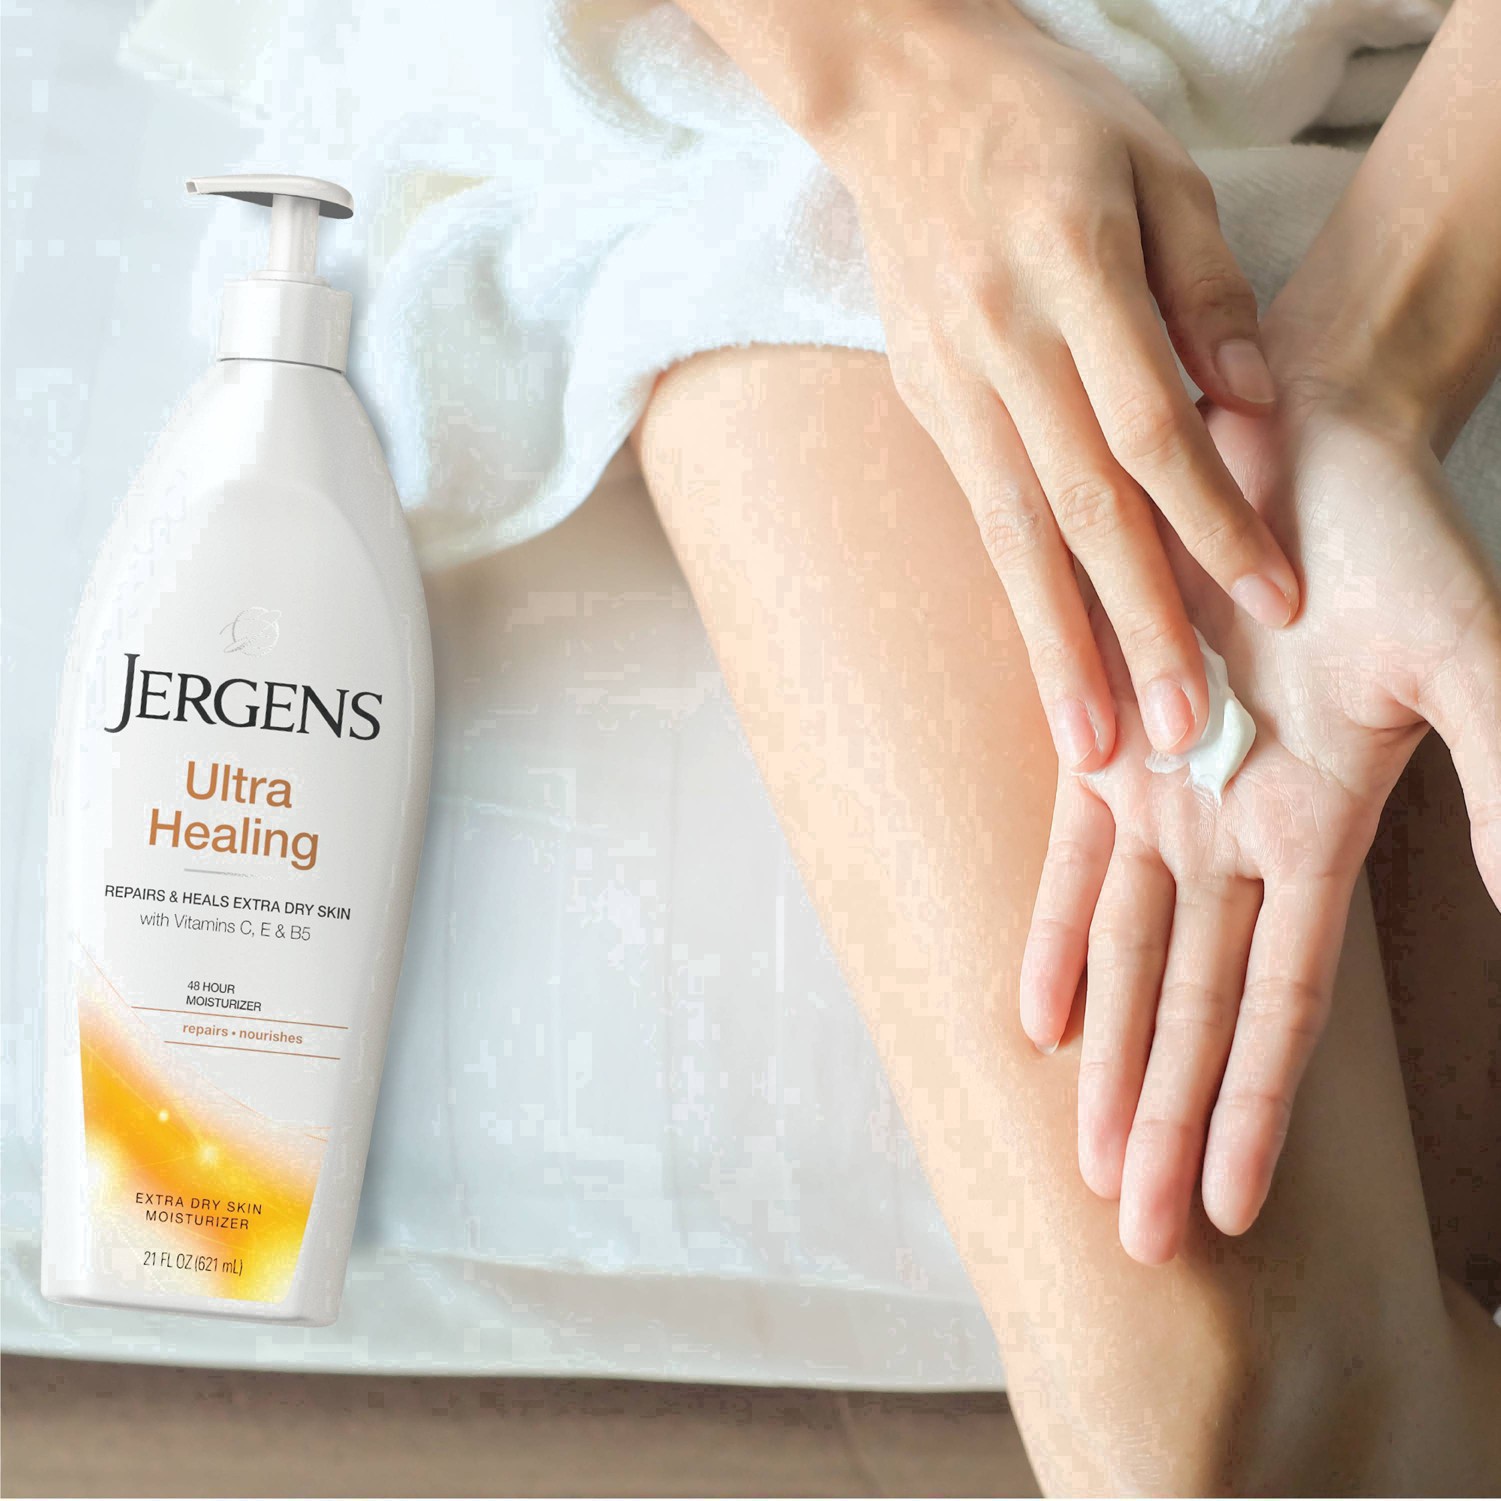 slide 42 of 67, Jergens Ultra Healing Dry Skin Moisturizer, Body and Hand Lotion, for Absorption into Extra Dry Skin, 21 Oz, 21 fl oz